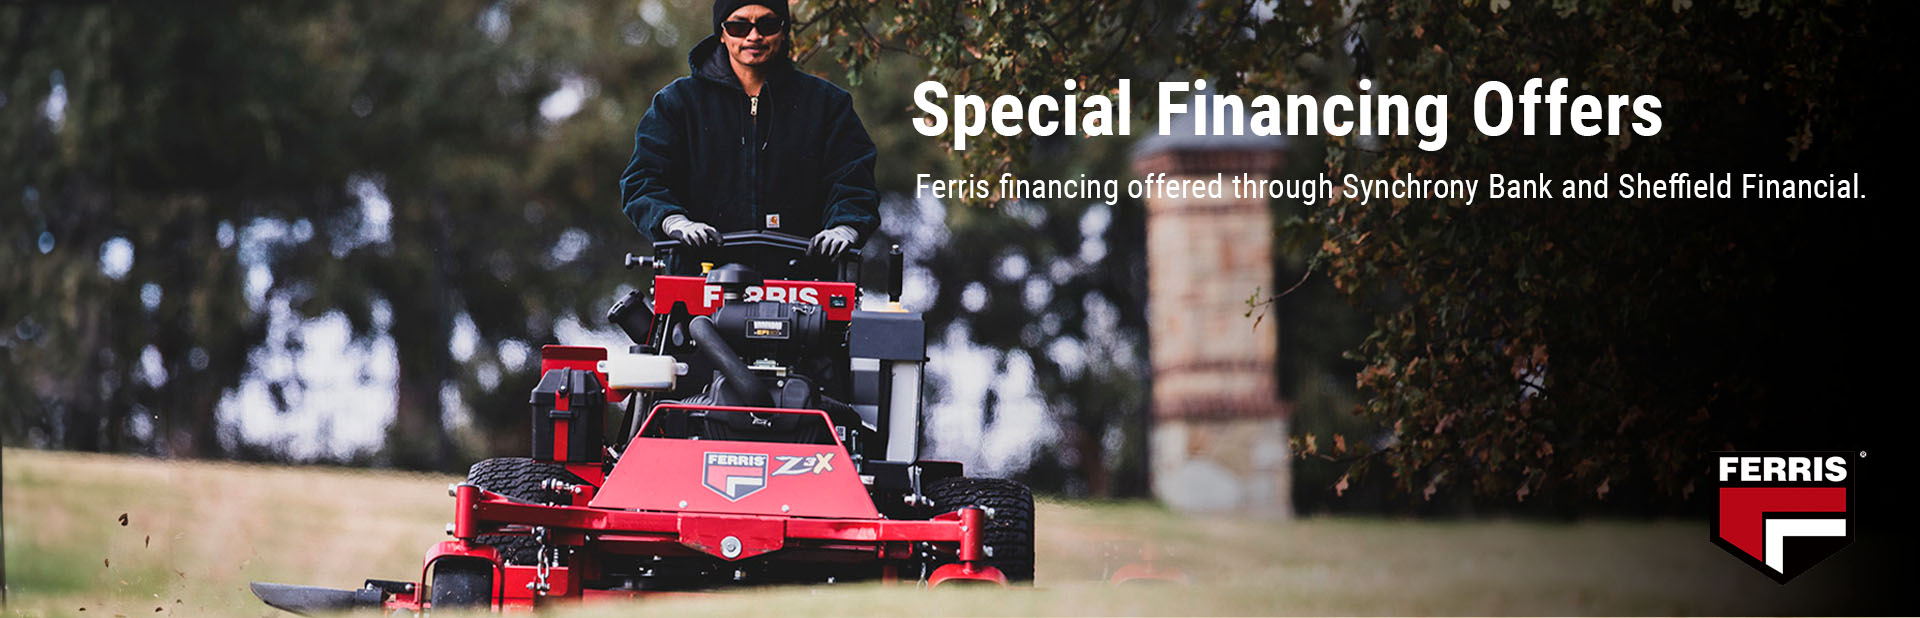 Special Financing Offers